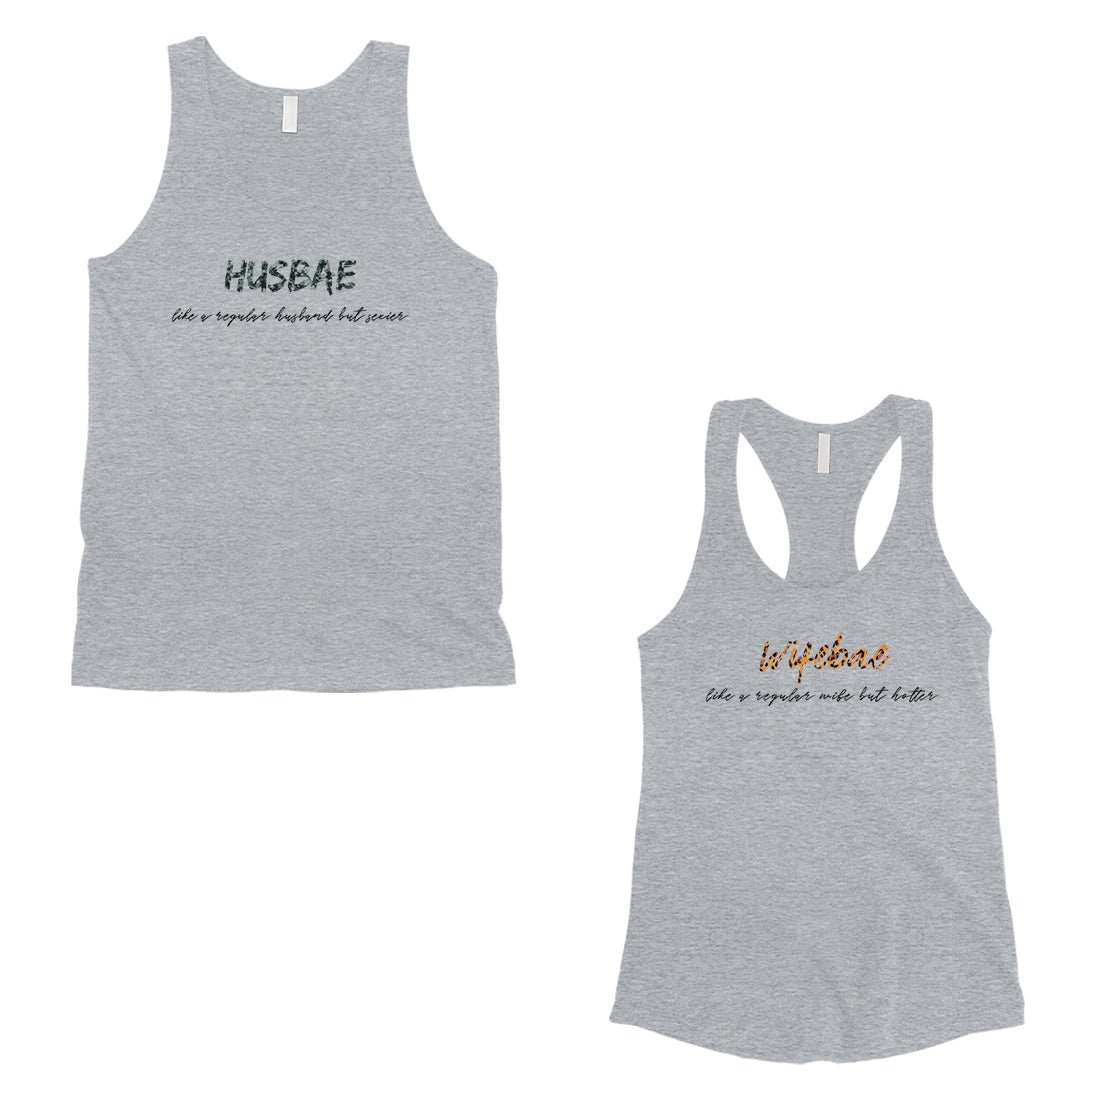 Husbae Wifebae Leopard Military Matching Couple Tank Tops Gifts Gray